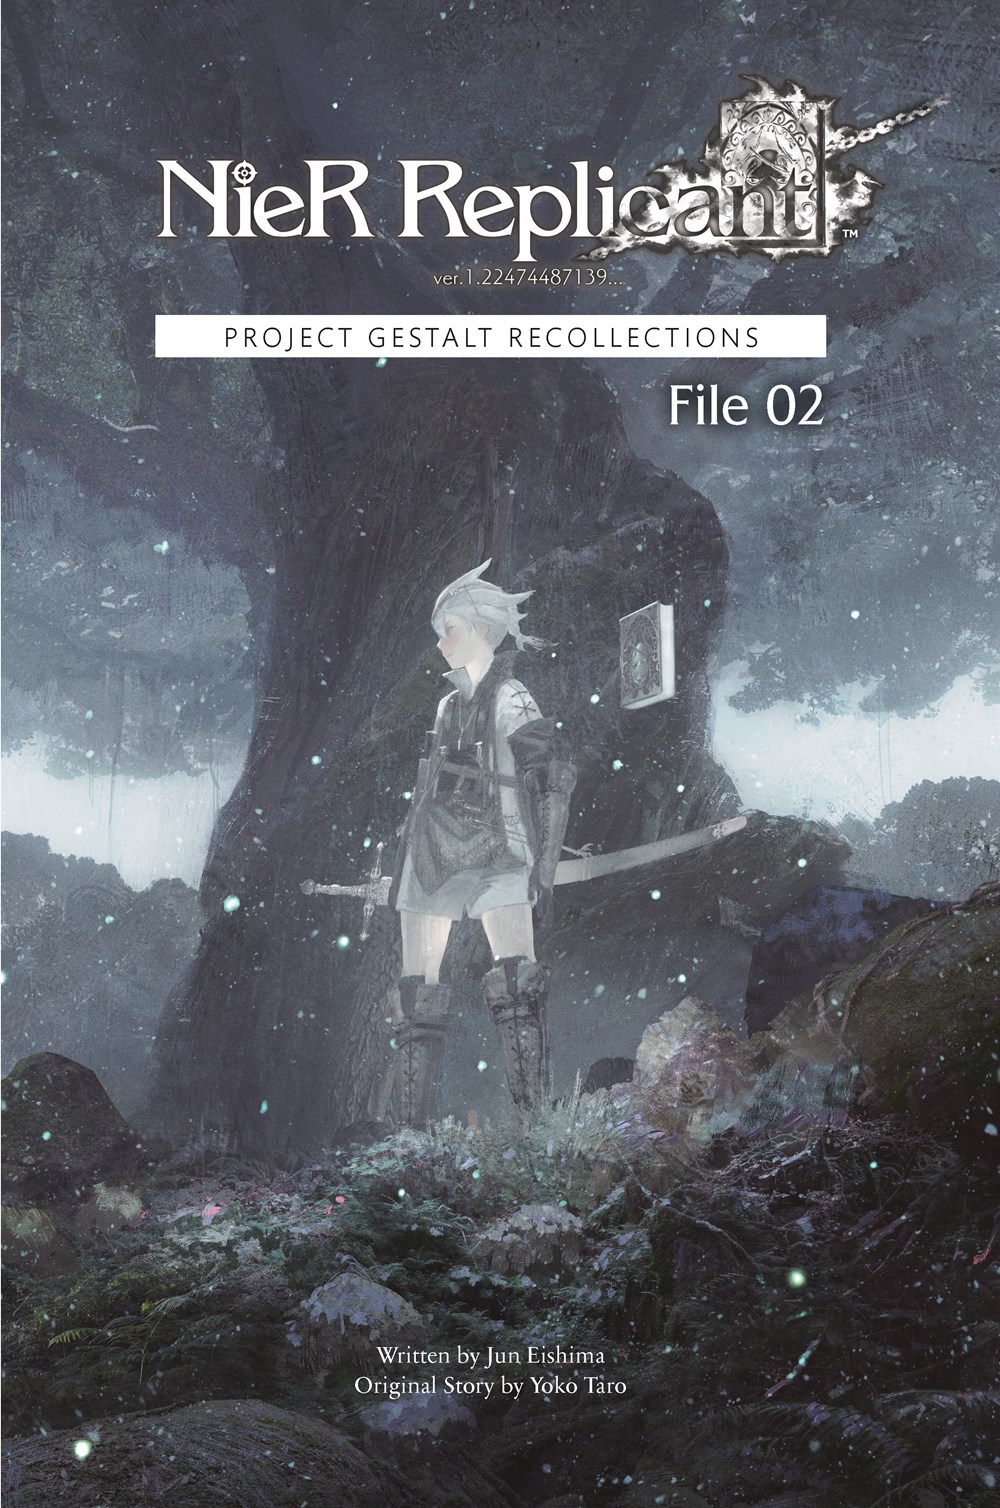 NieR Replicant ver.1.22474487139... Project Gestalt Recollections File 2 Novel (Hardcover) image count 0